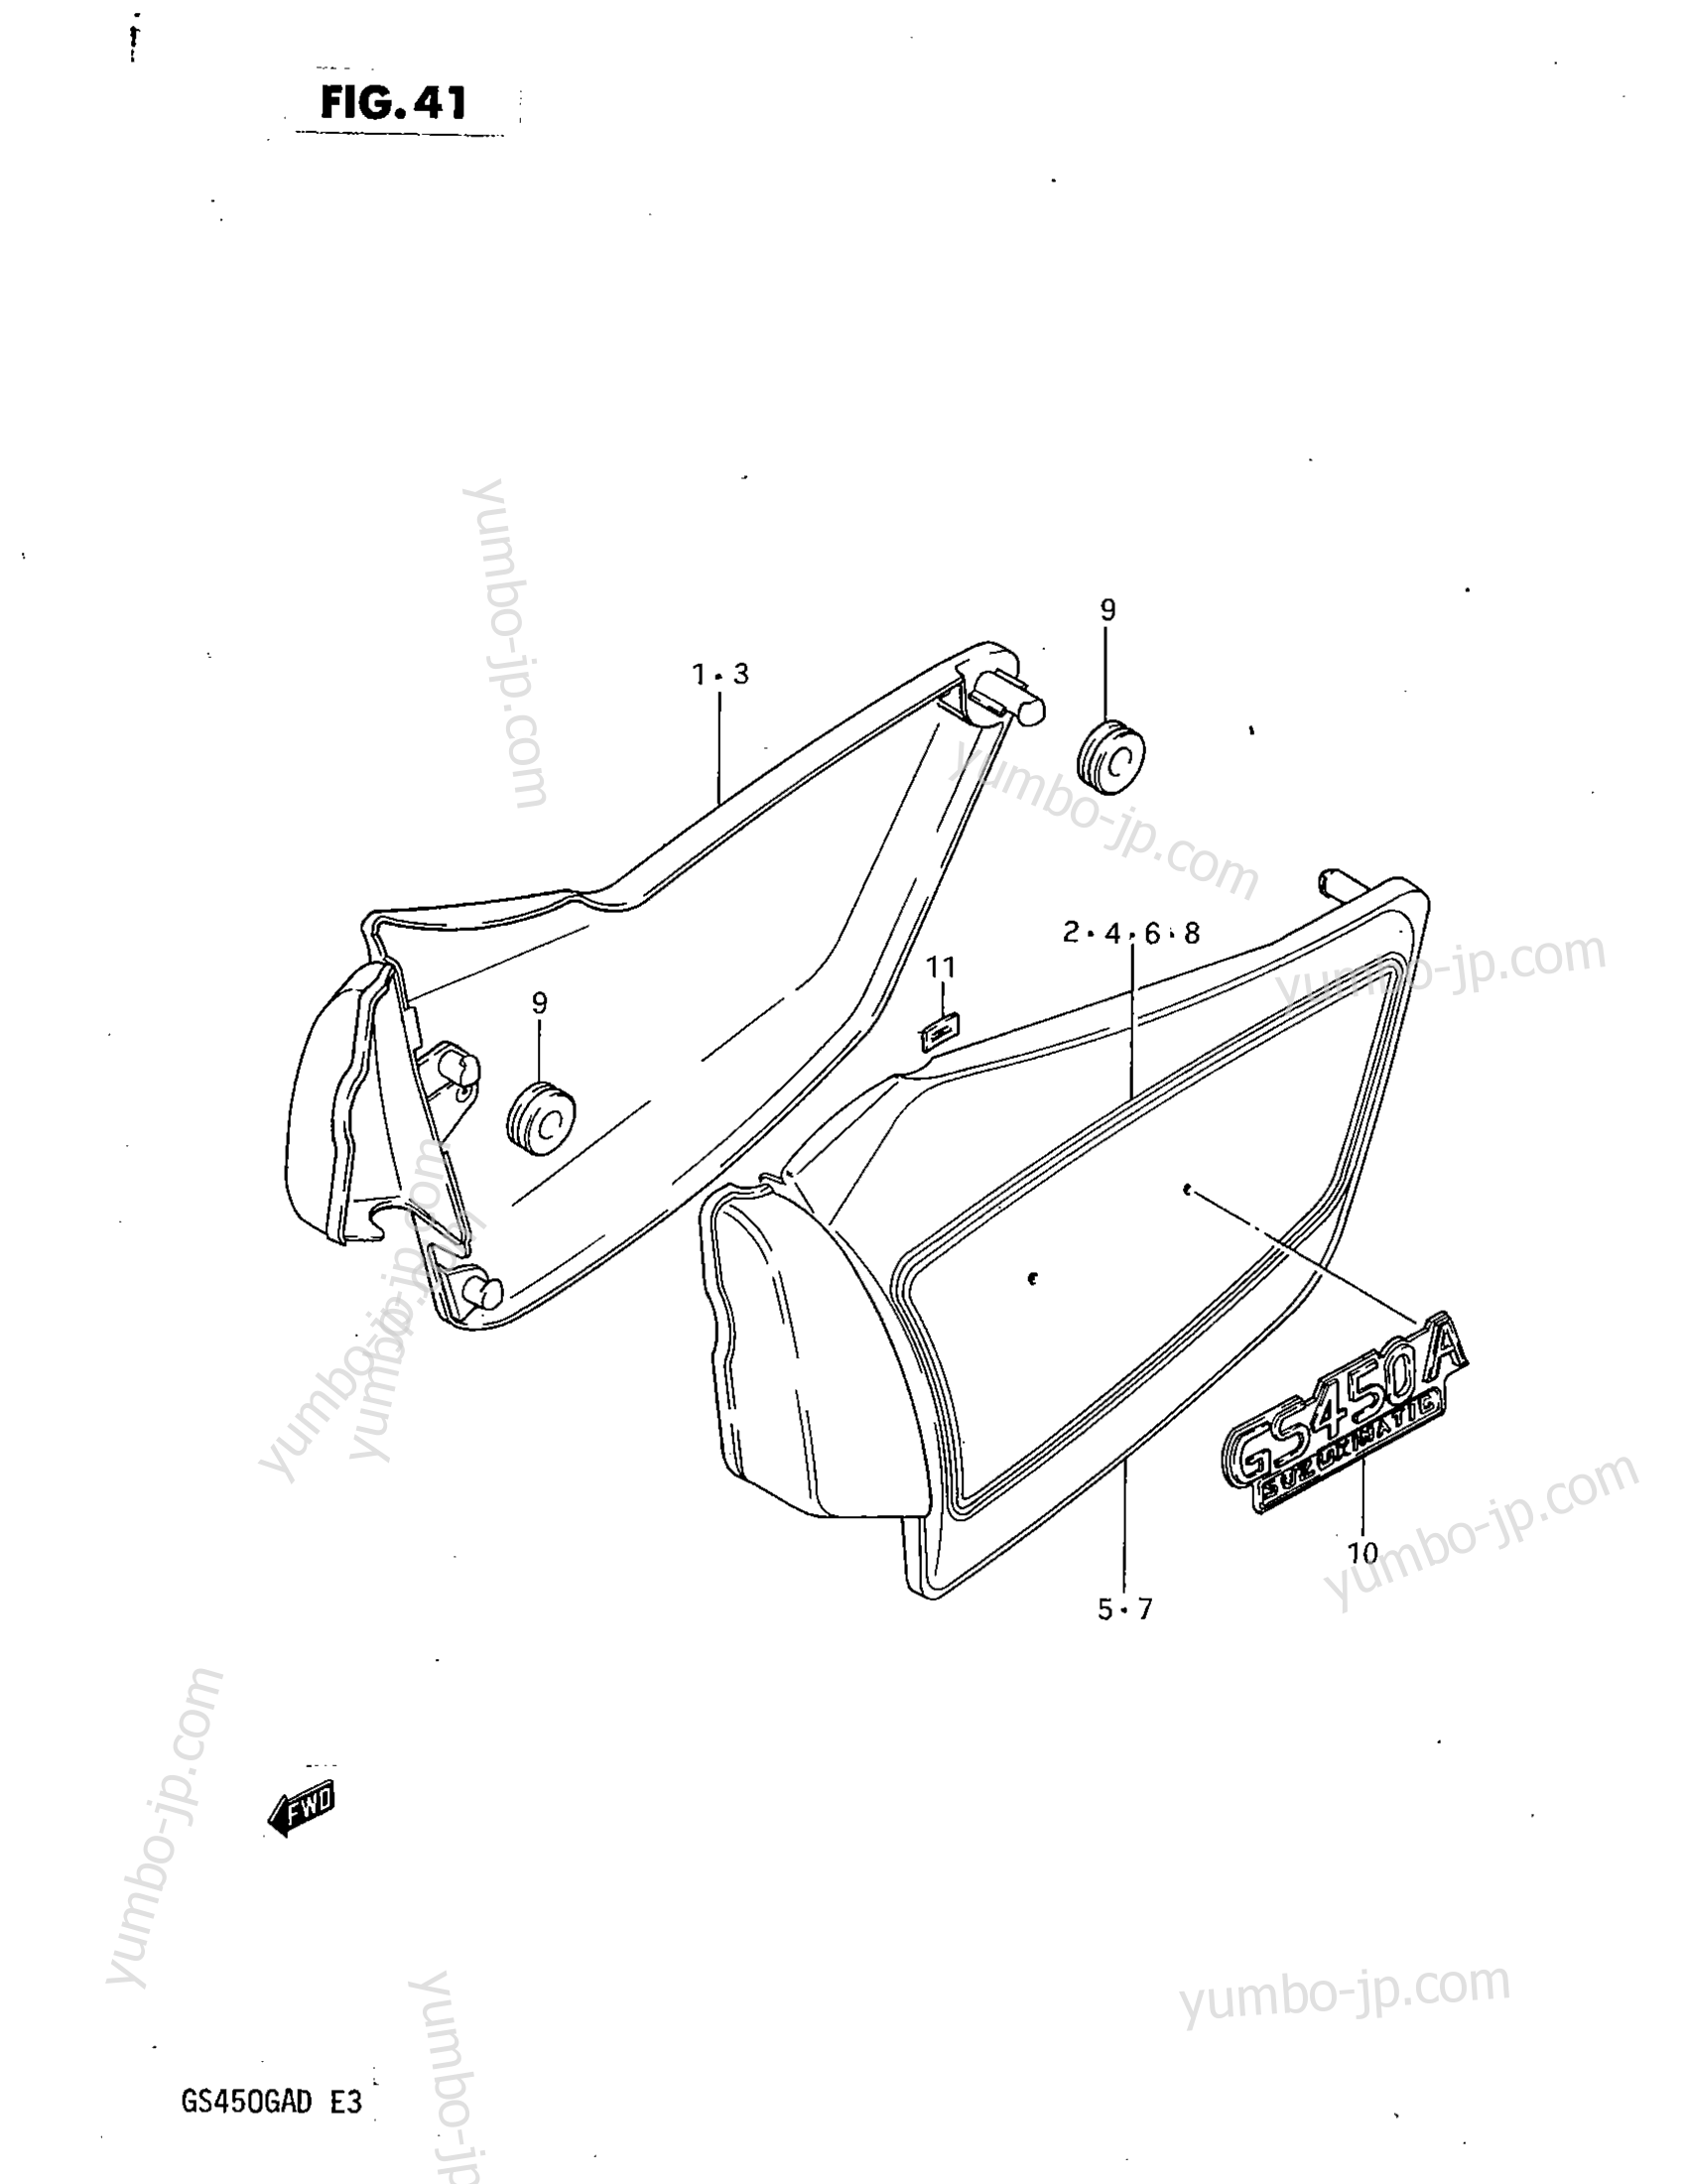 FRAME COVER (MODEL Z) for motorcycles SUZUKI GS450GA 1983 year